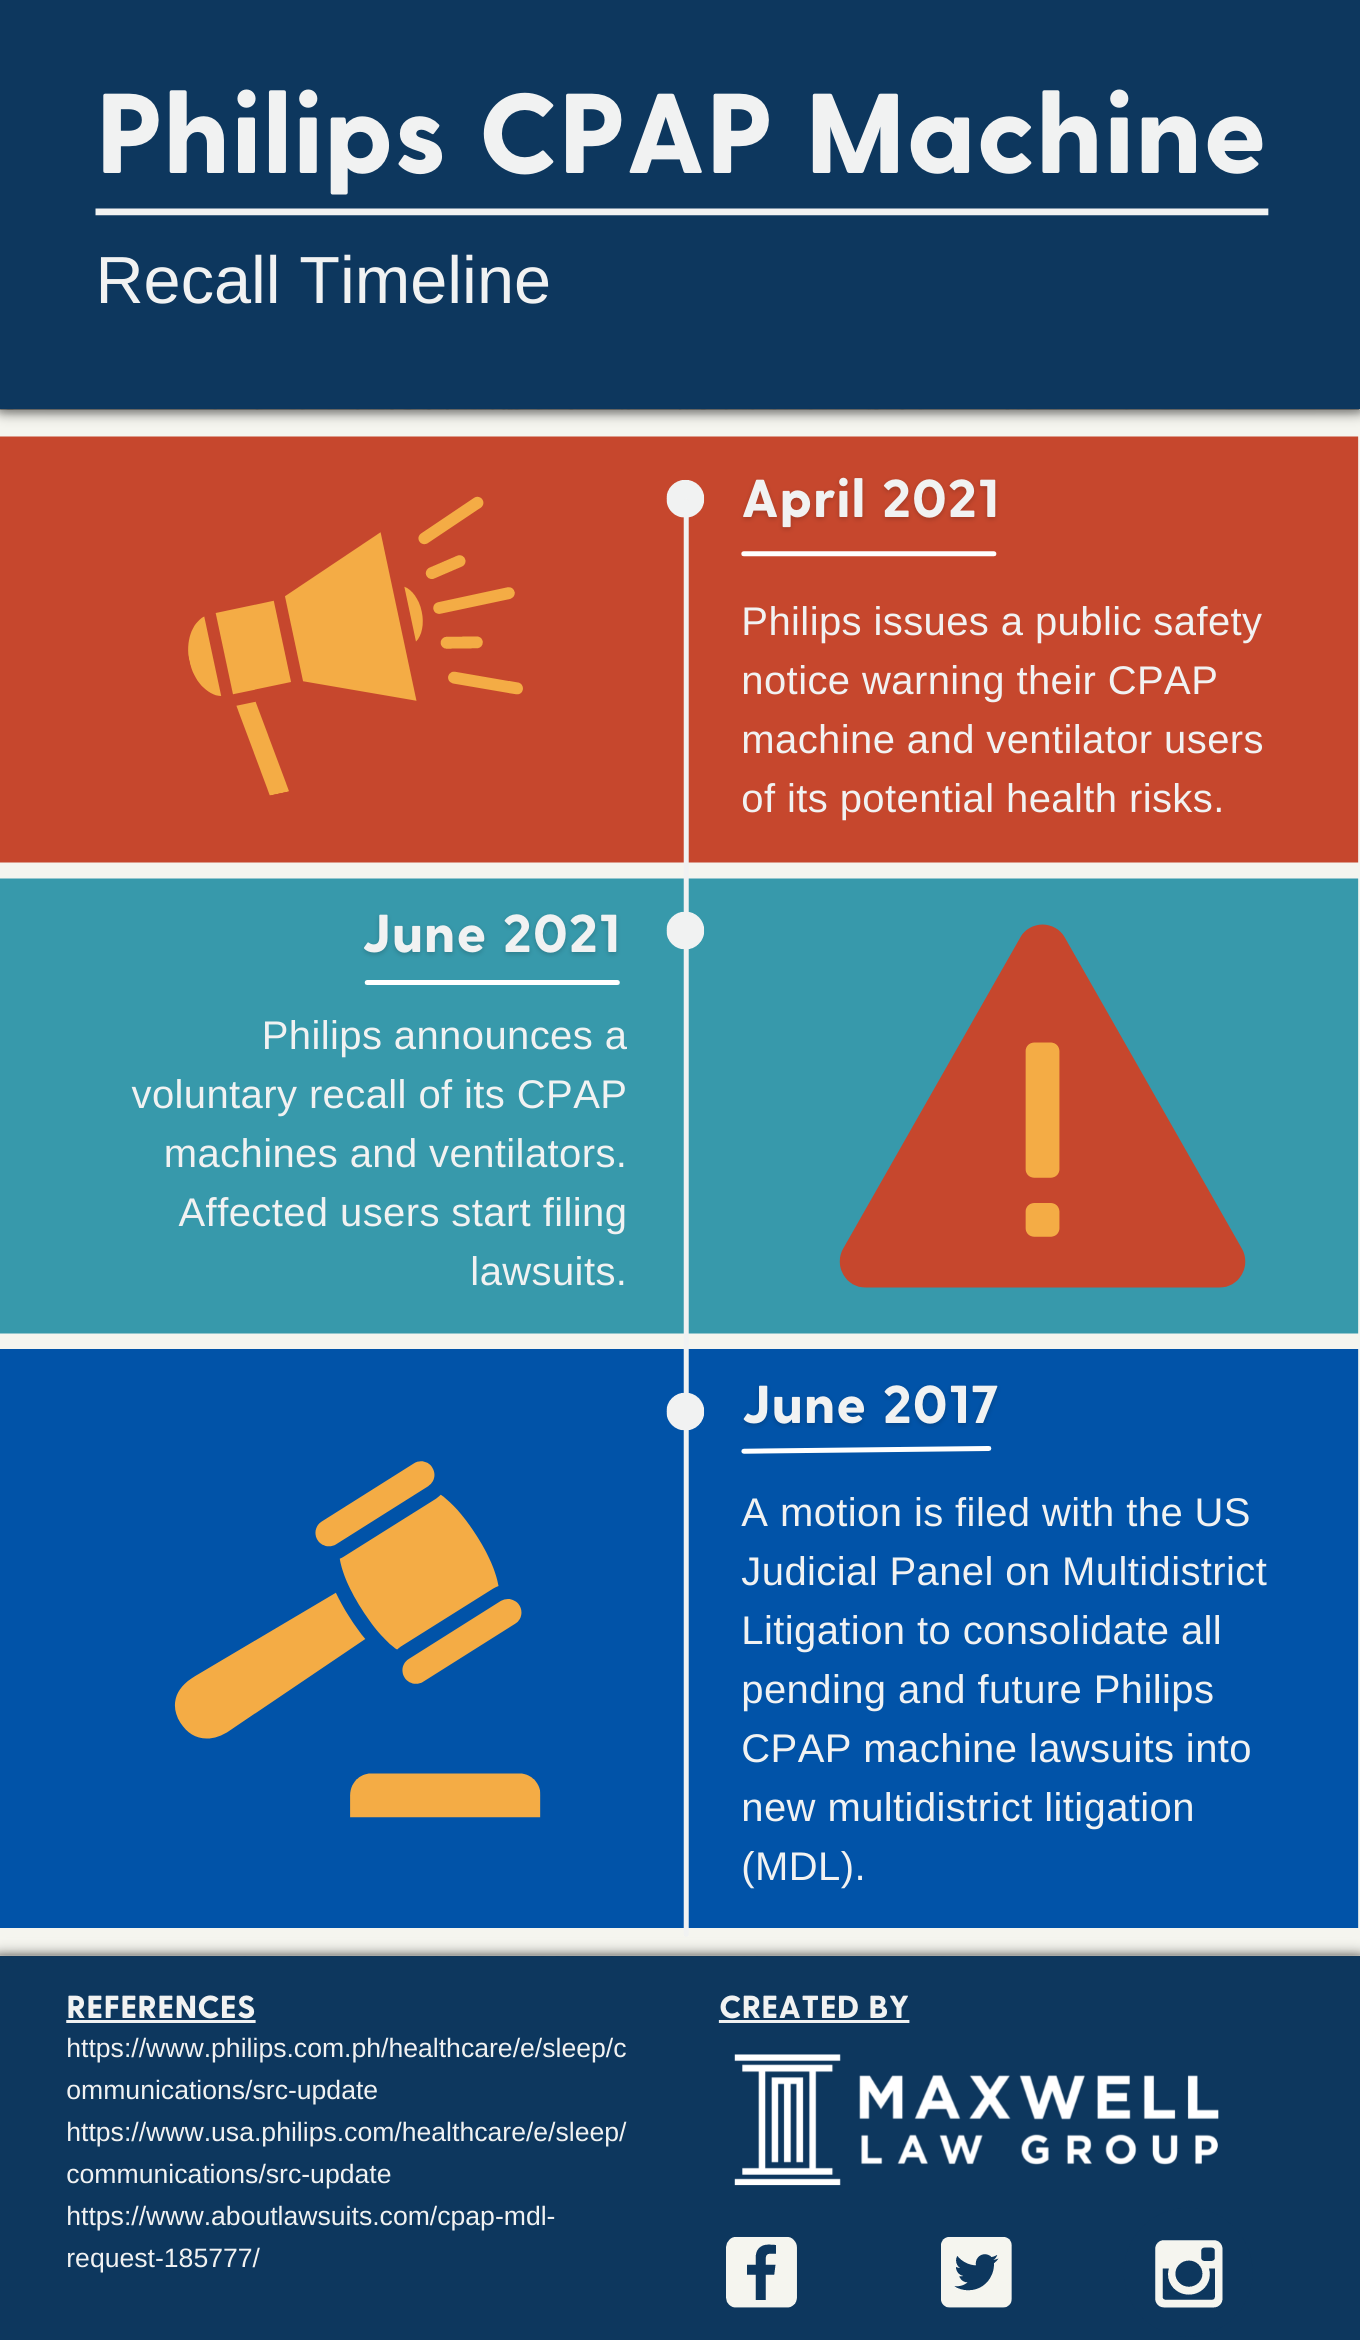 Philips CPAP machine timeline infographic